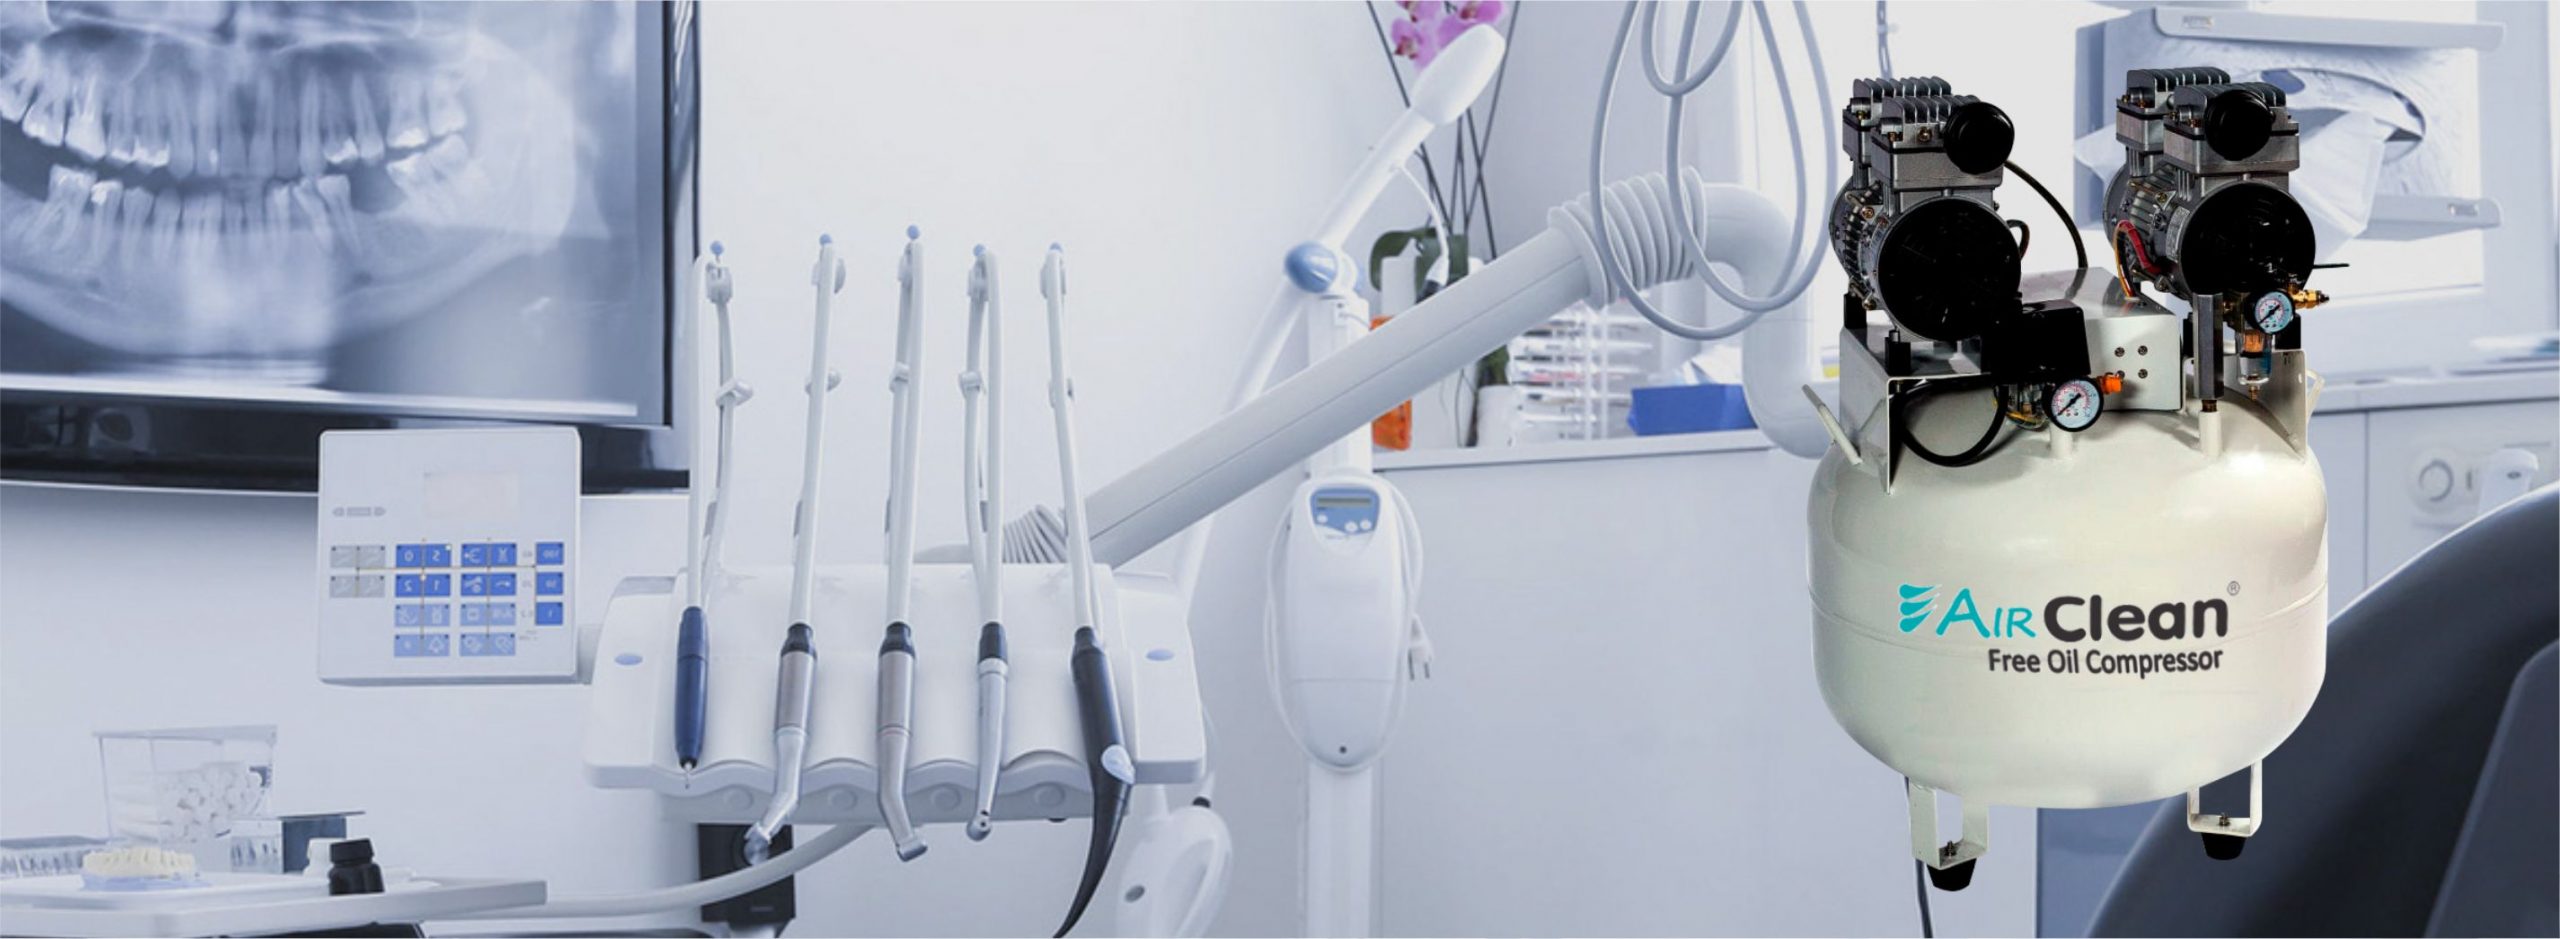 Improving the quality of dental and dental work